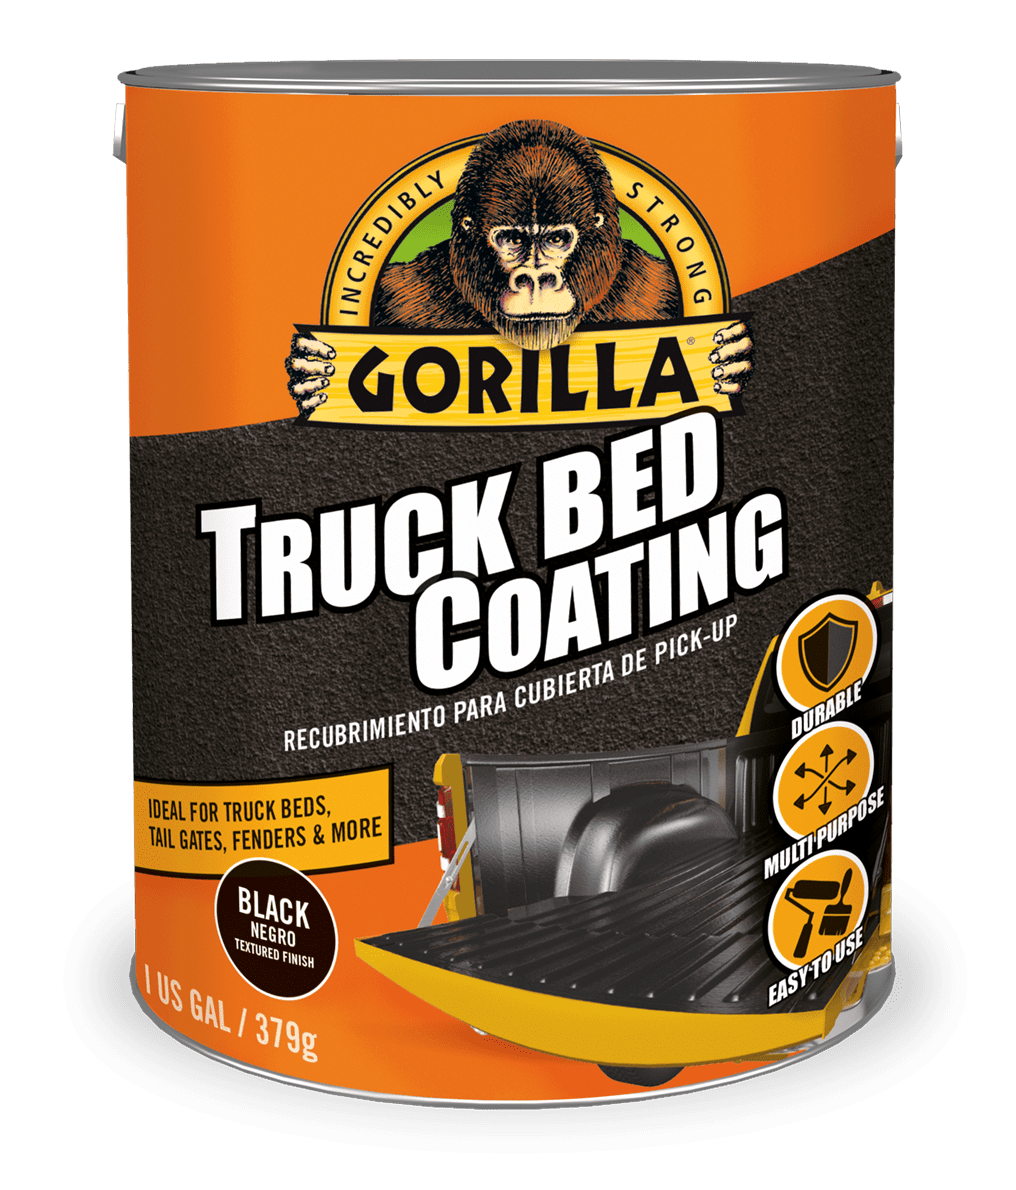 TRUCK BED COATING Image